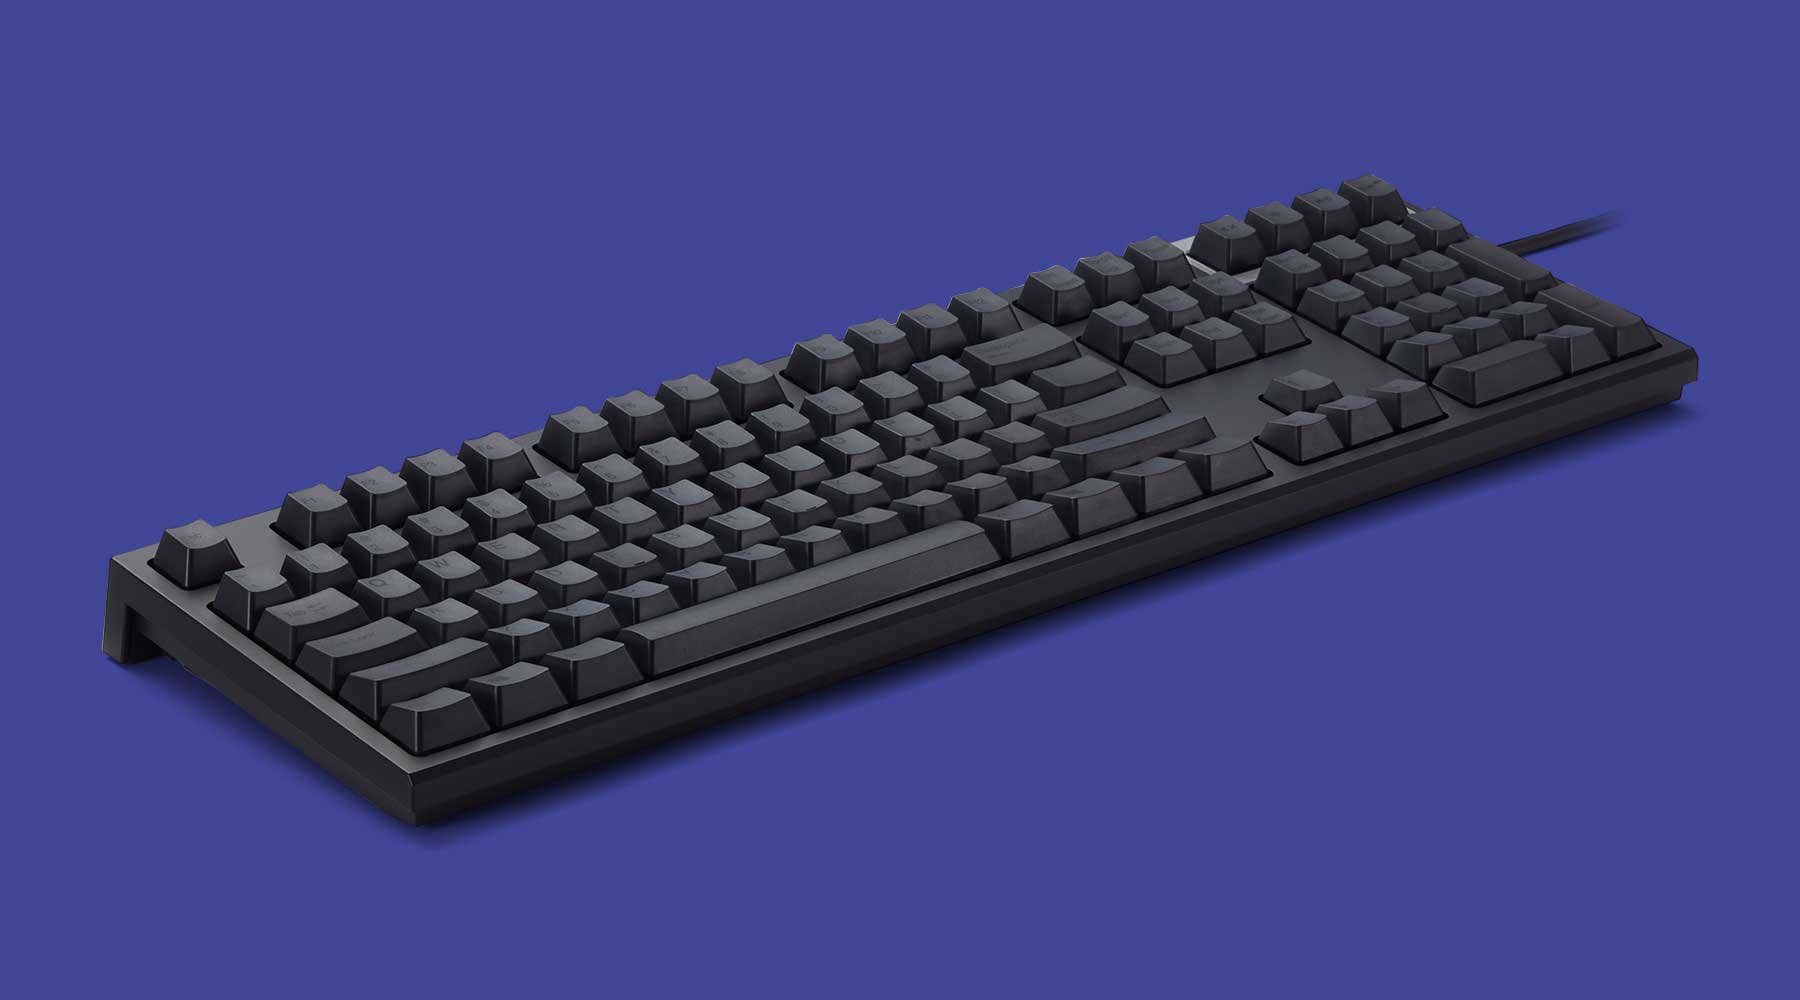 Product : REALFORCE A / R2A-US3-BK | REALFORCE | Premium Keyboard 